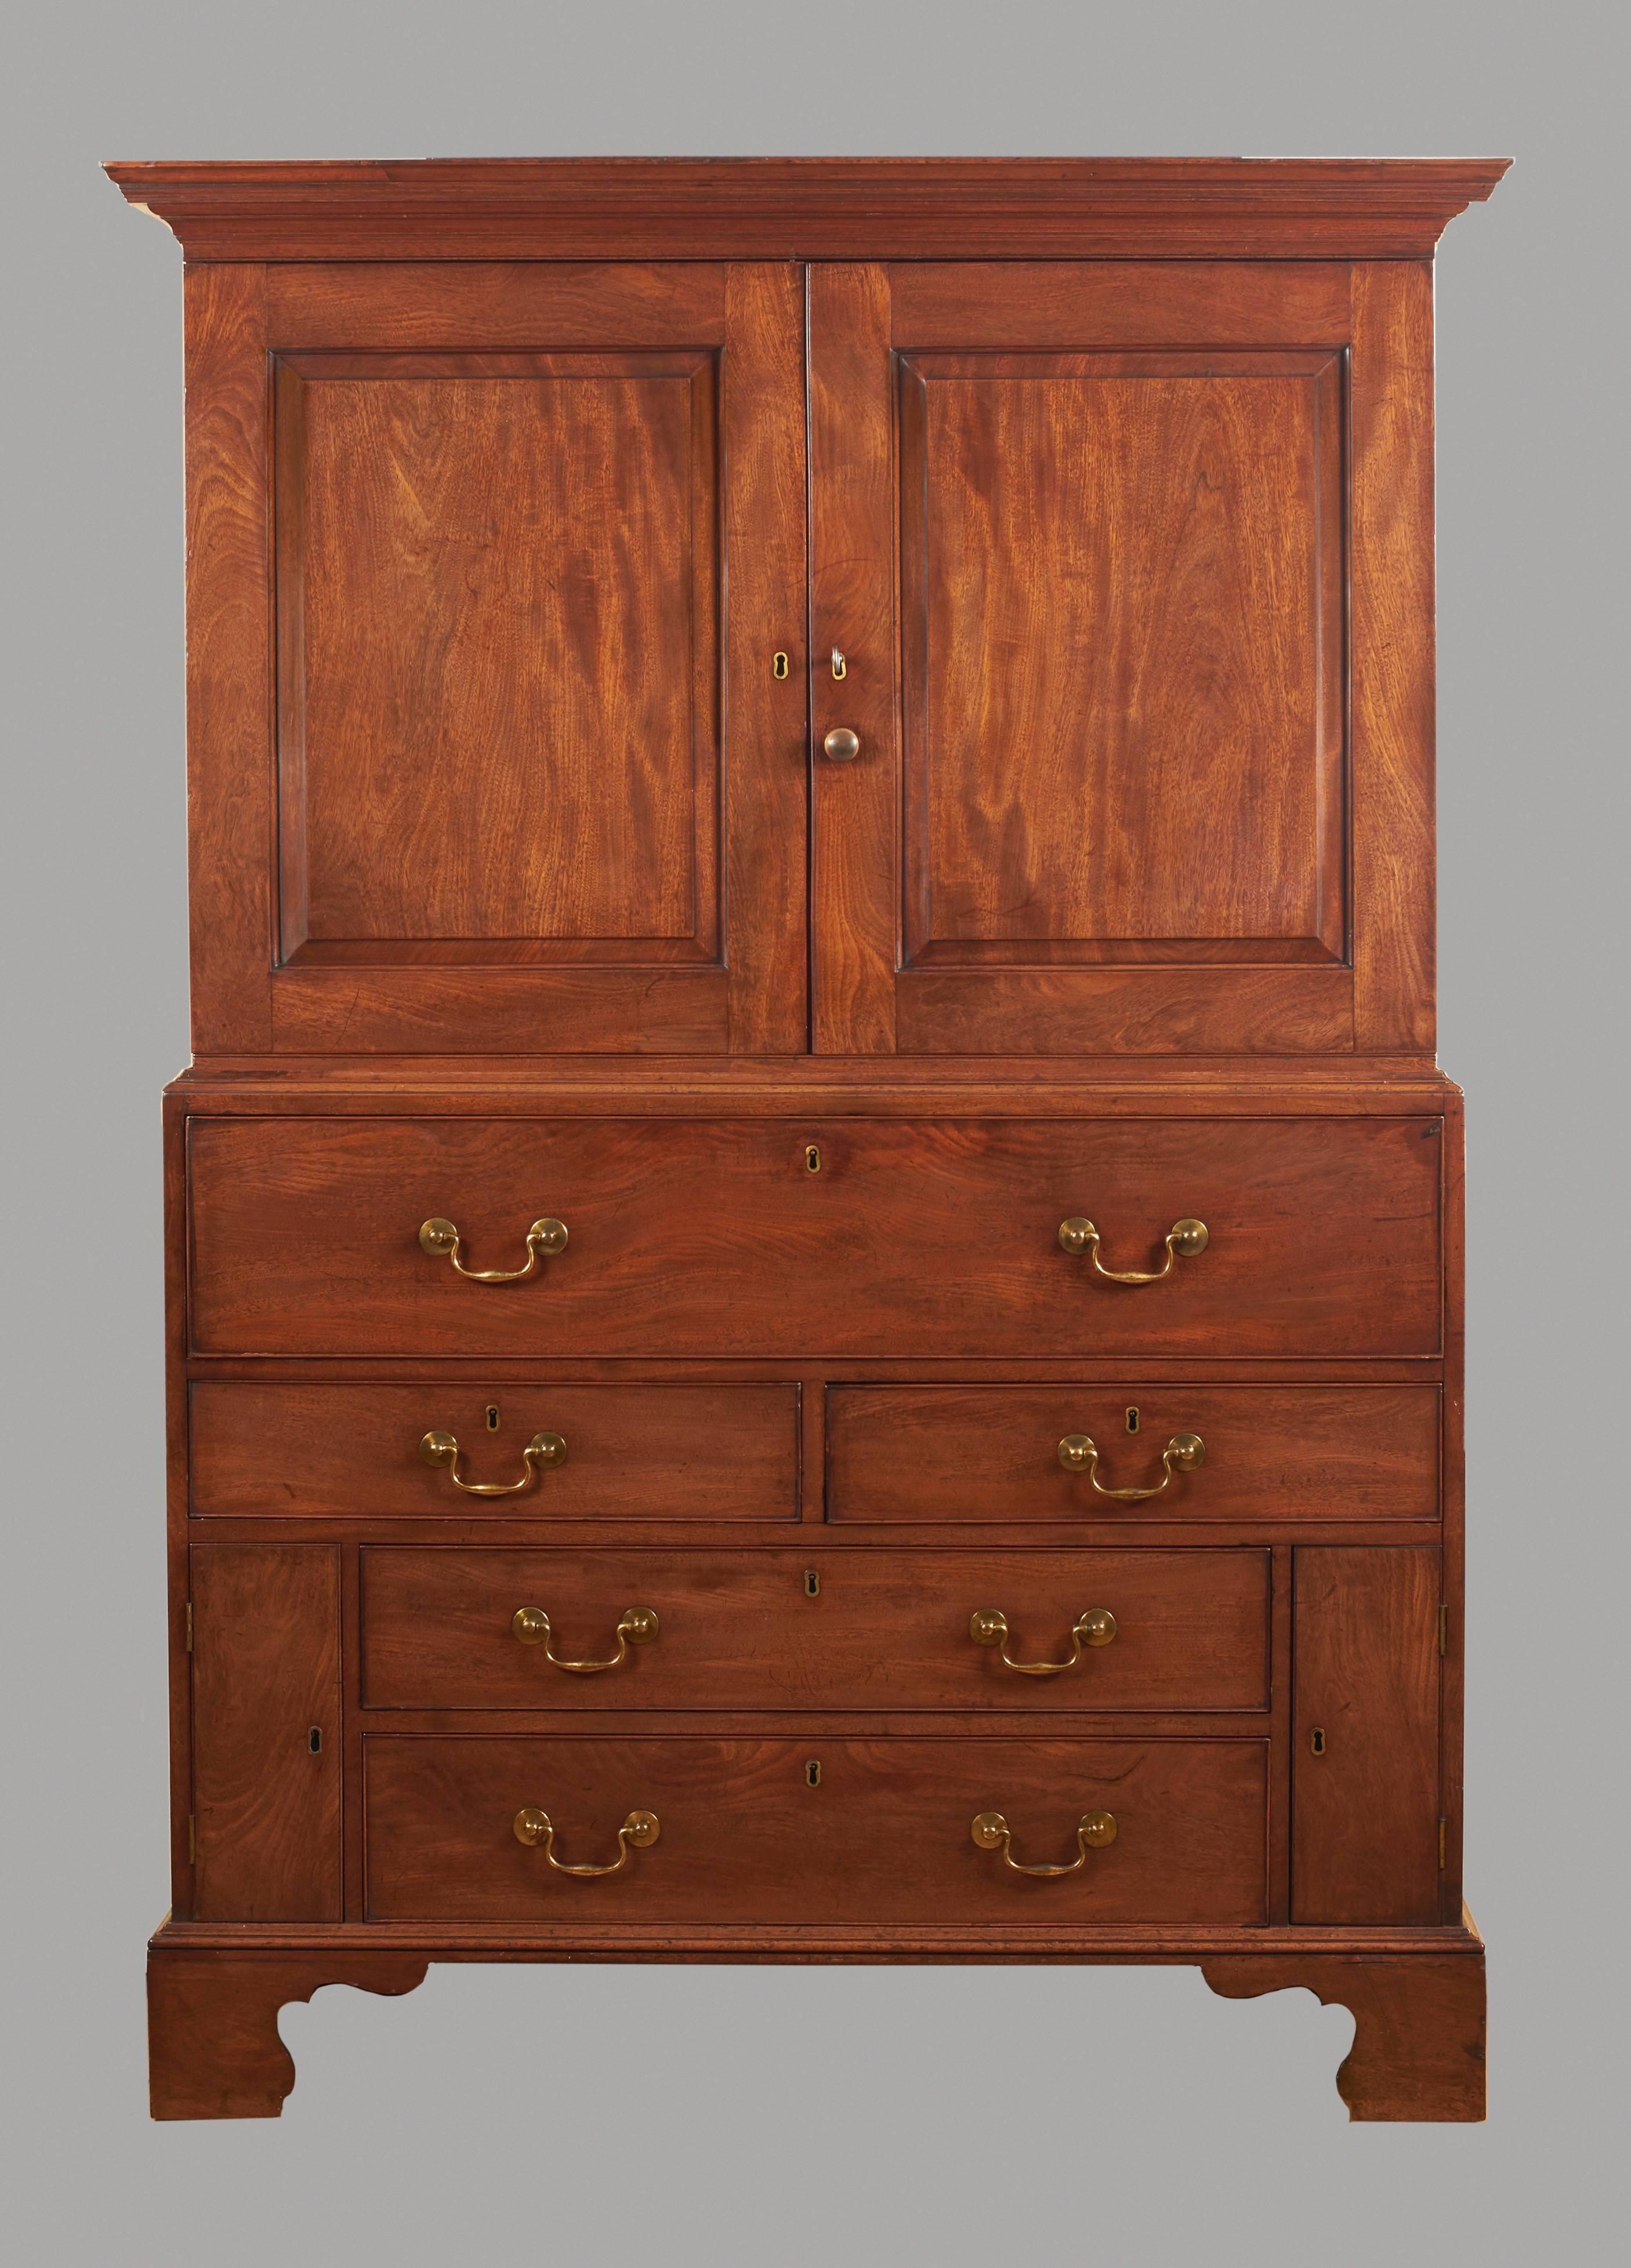 A fine quality George III period secretaire cabinet, the upper stage with paneled cupboard doors opening to reveal a single shelf above two drawers, the lower portion with a well-fitted secretaire interior with eight small drawers and a prospect